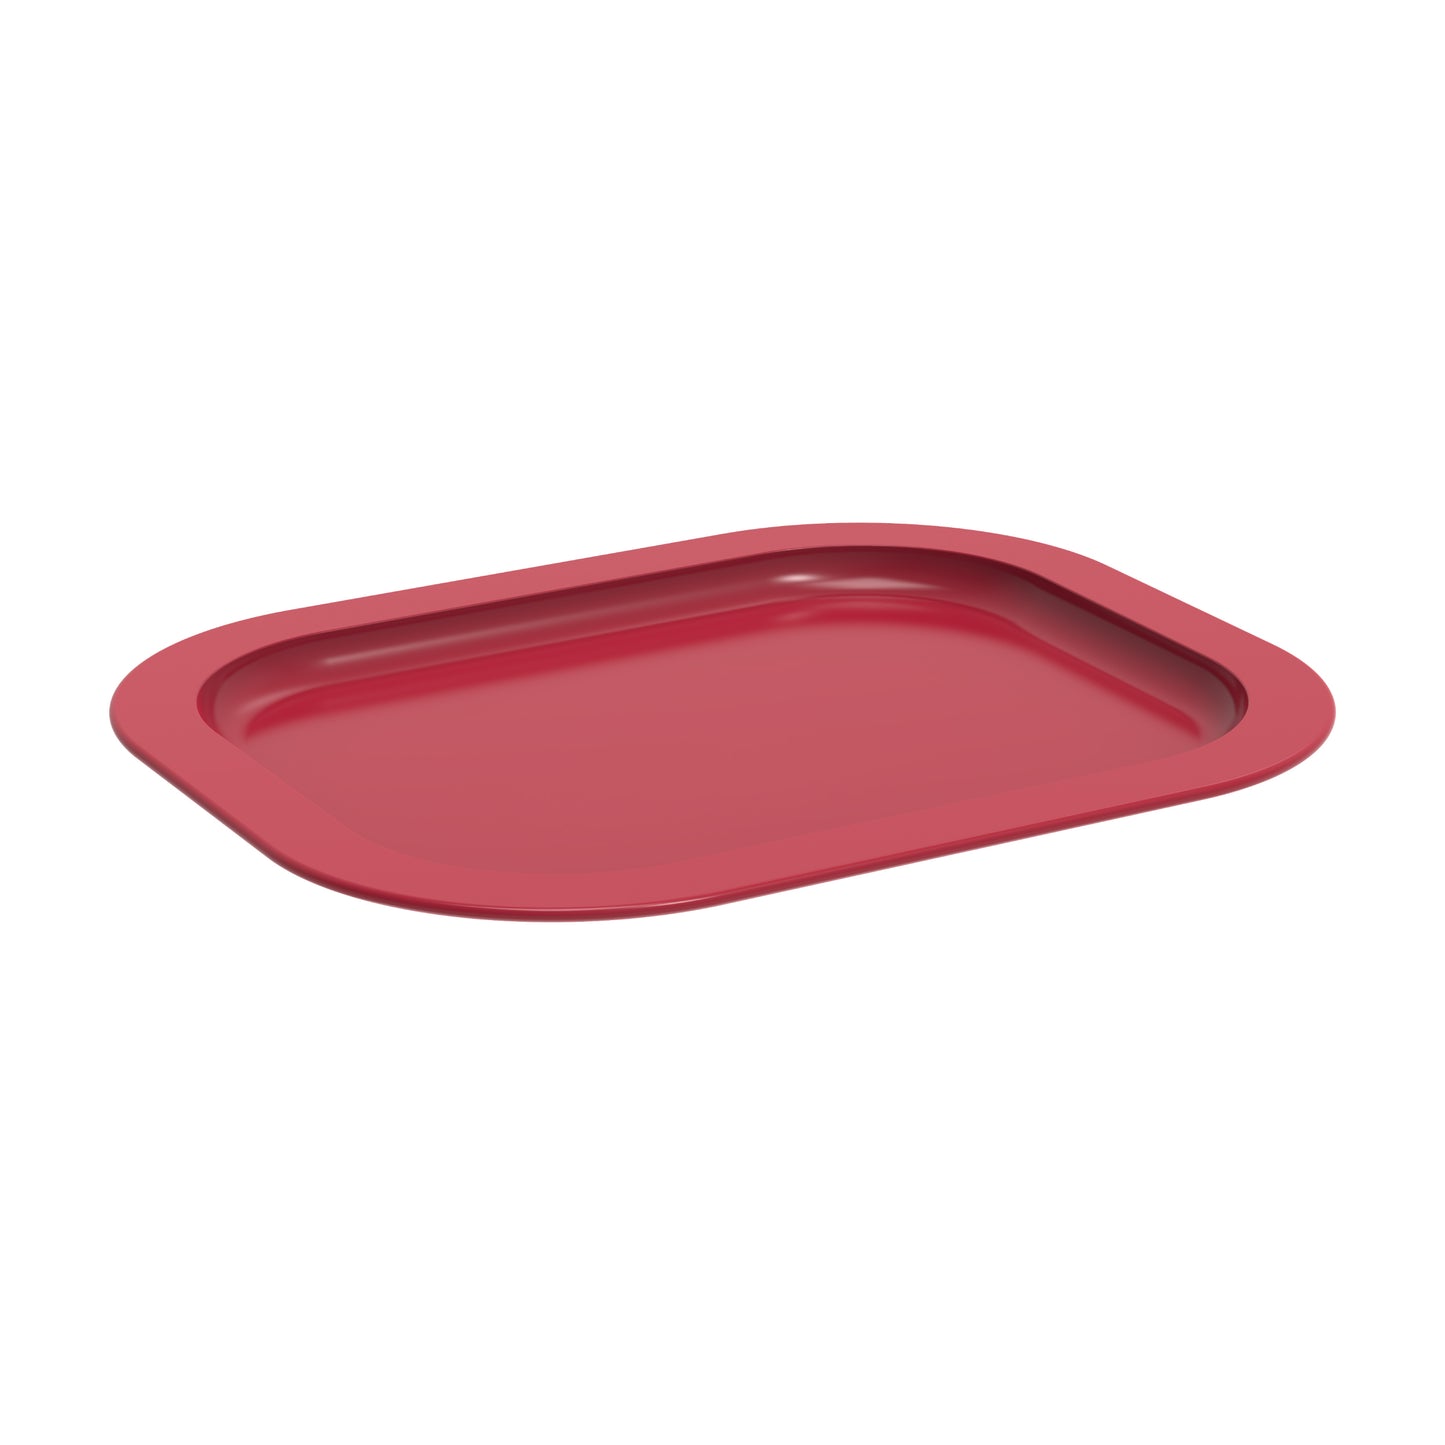 Serving Plastic Tray - Large